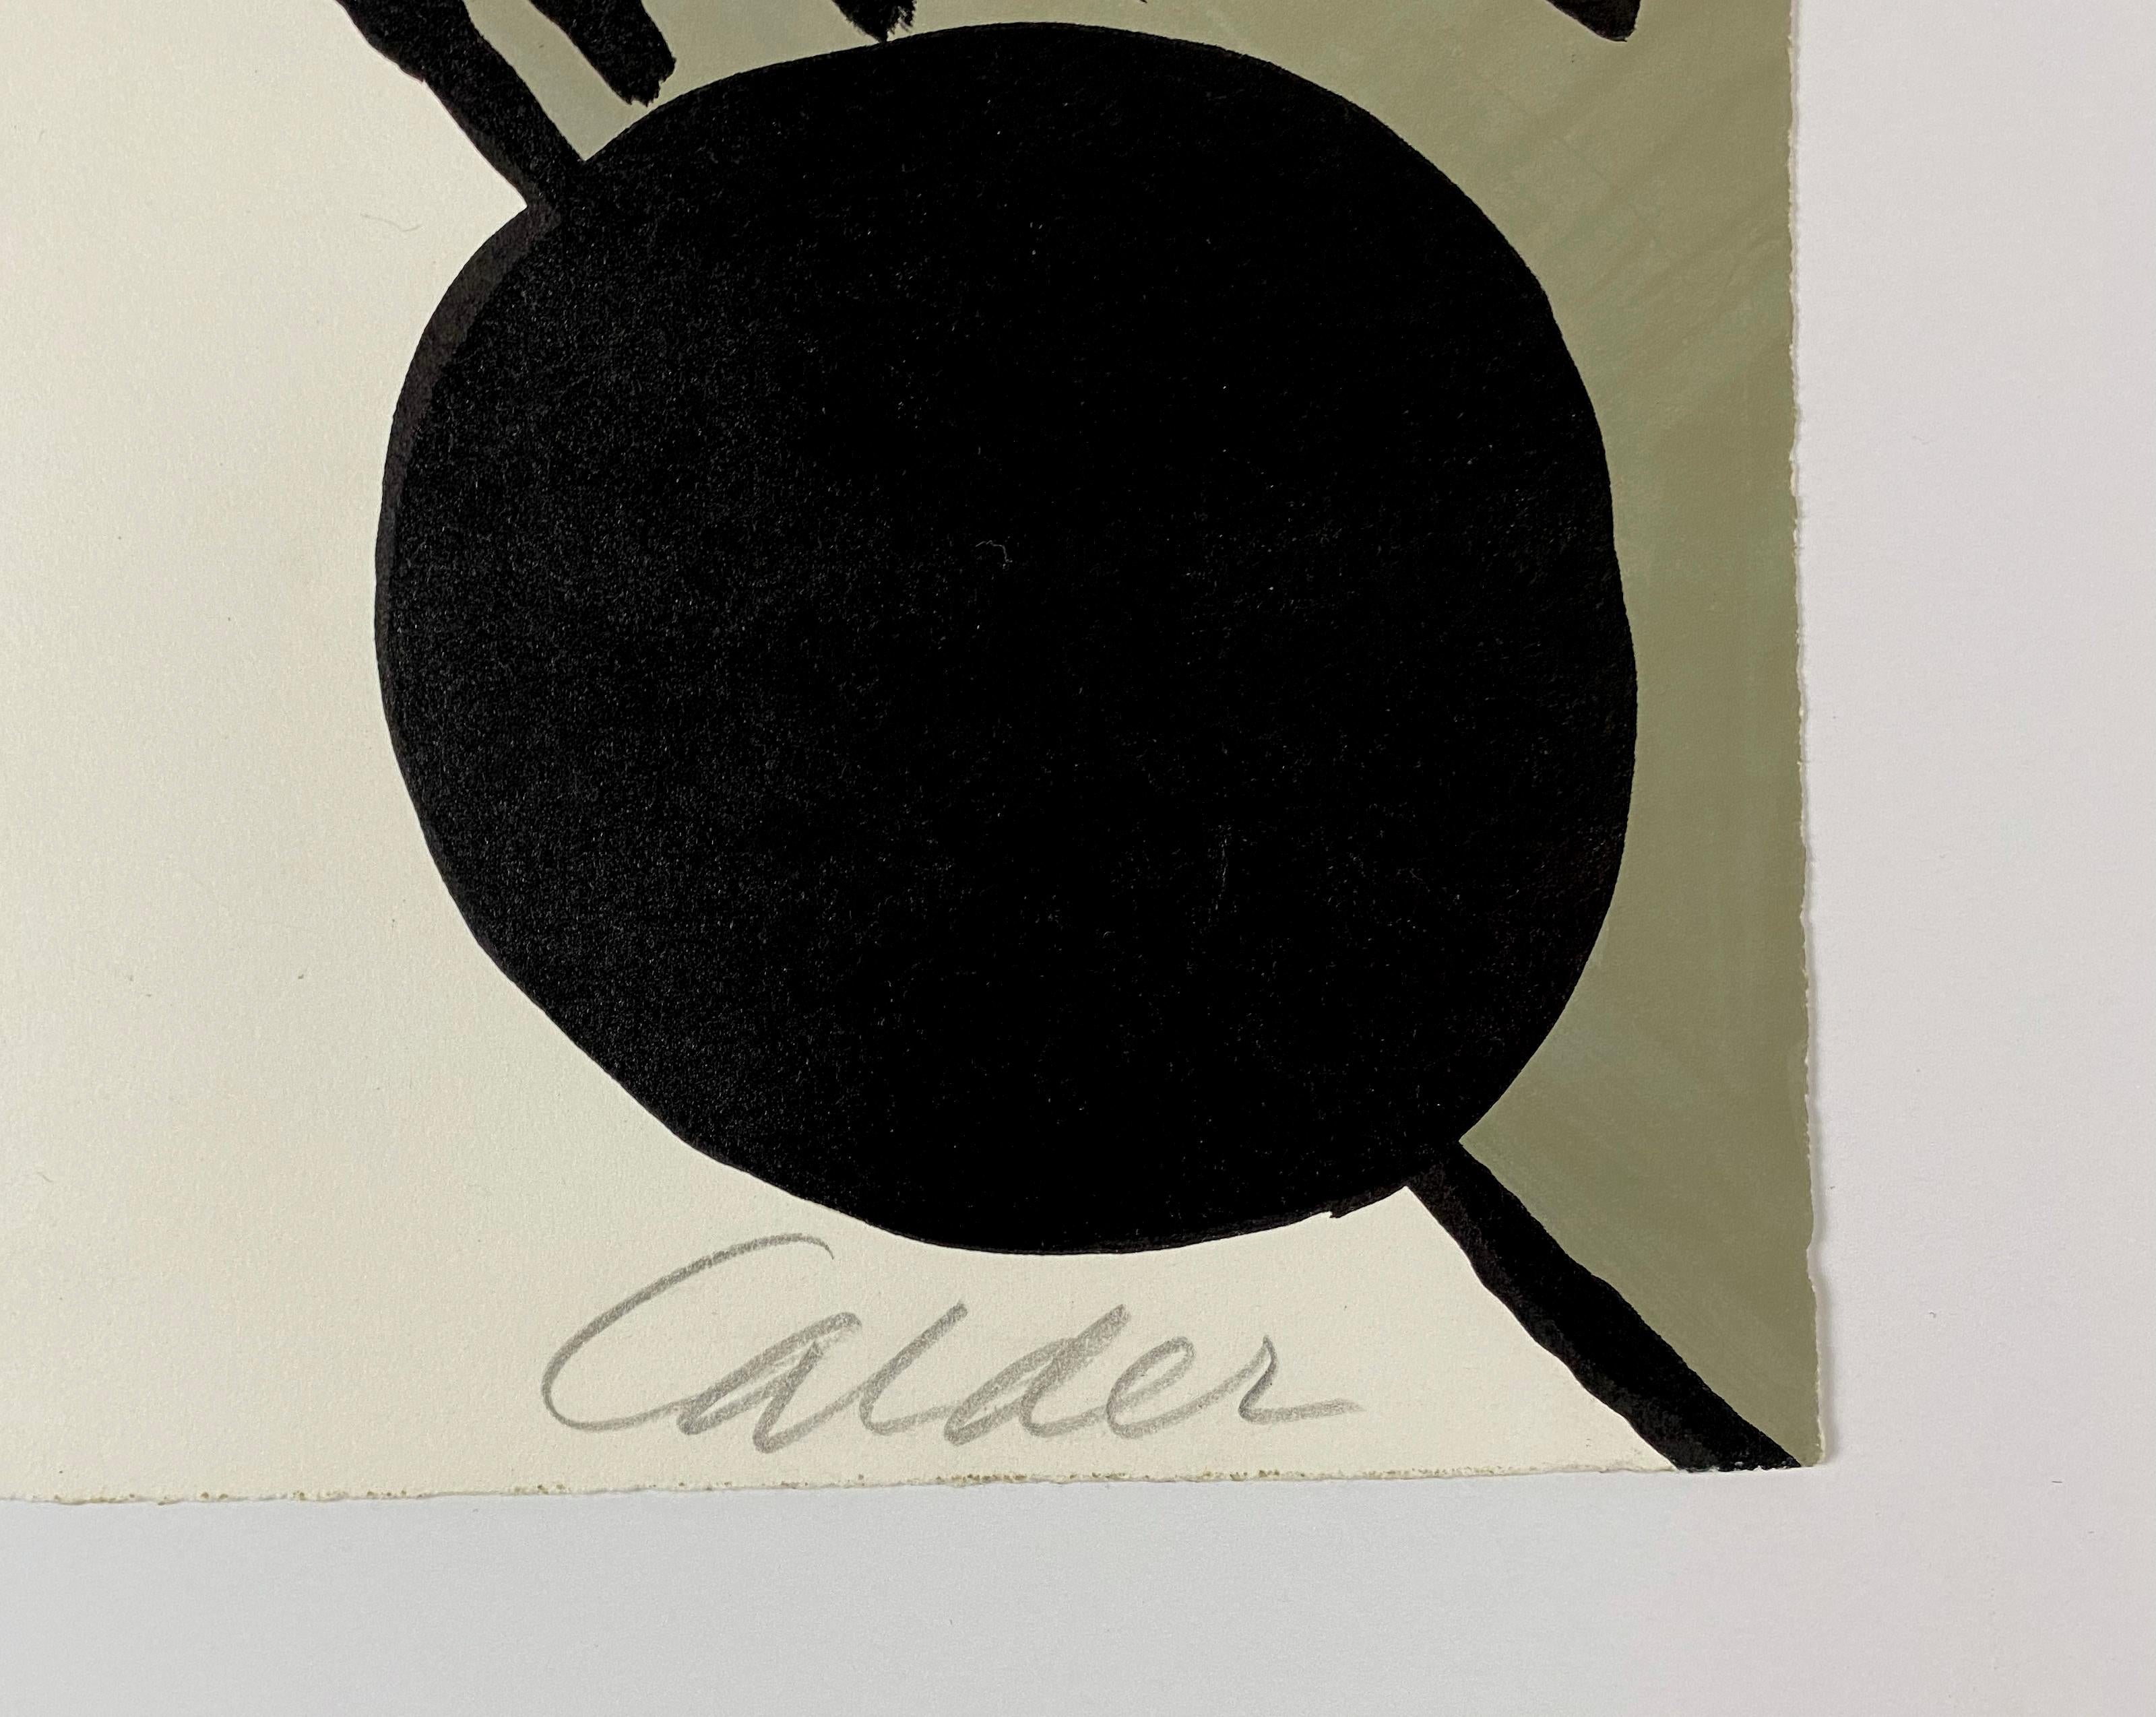 Artist: Alexander Calder
Title: Le Bateau Lavoir (The Laundry Boat)
Year: 1969
Medium: Lithograph
Edition: 73/75
Numbered 73/75 in pencil, lower margin   
Signed lower right
Dimensions: 21.75 in x 29.5 in 
Condition: Good

